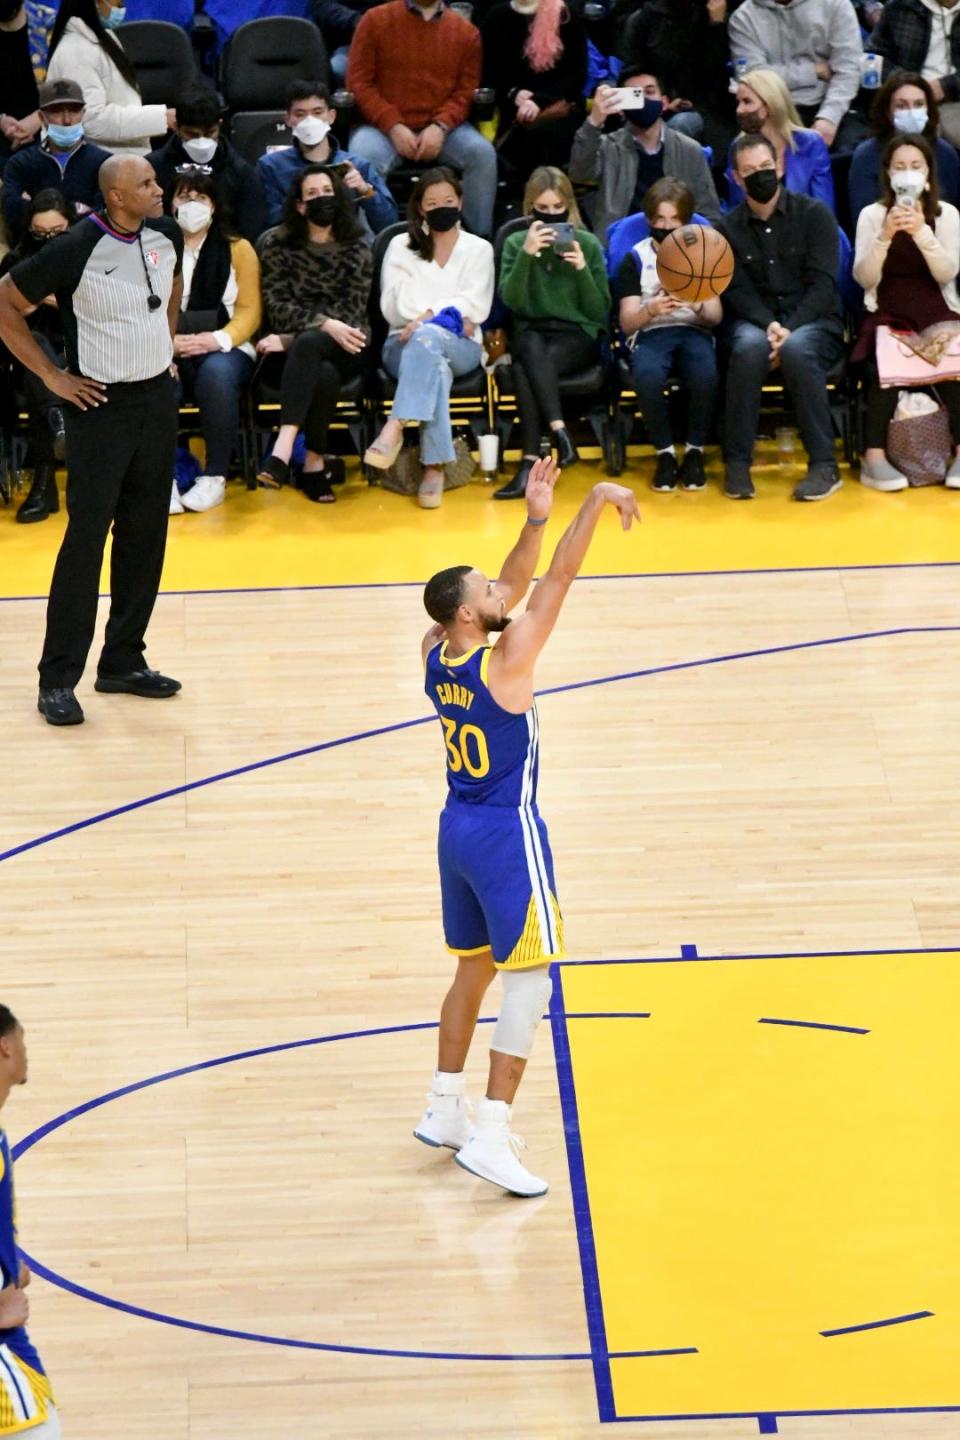 Golden State's Stephen Curry shoots a free throw as the Warriors host the Pacers at Chase Center in San Francisco on Jan. 20, 2022.